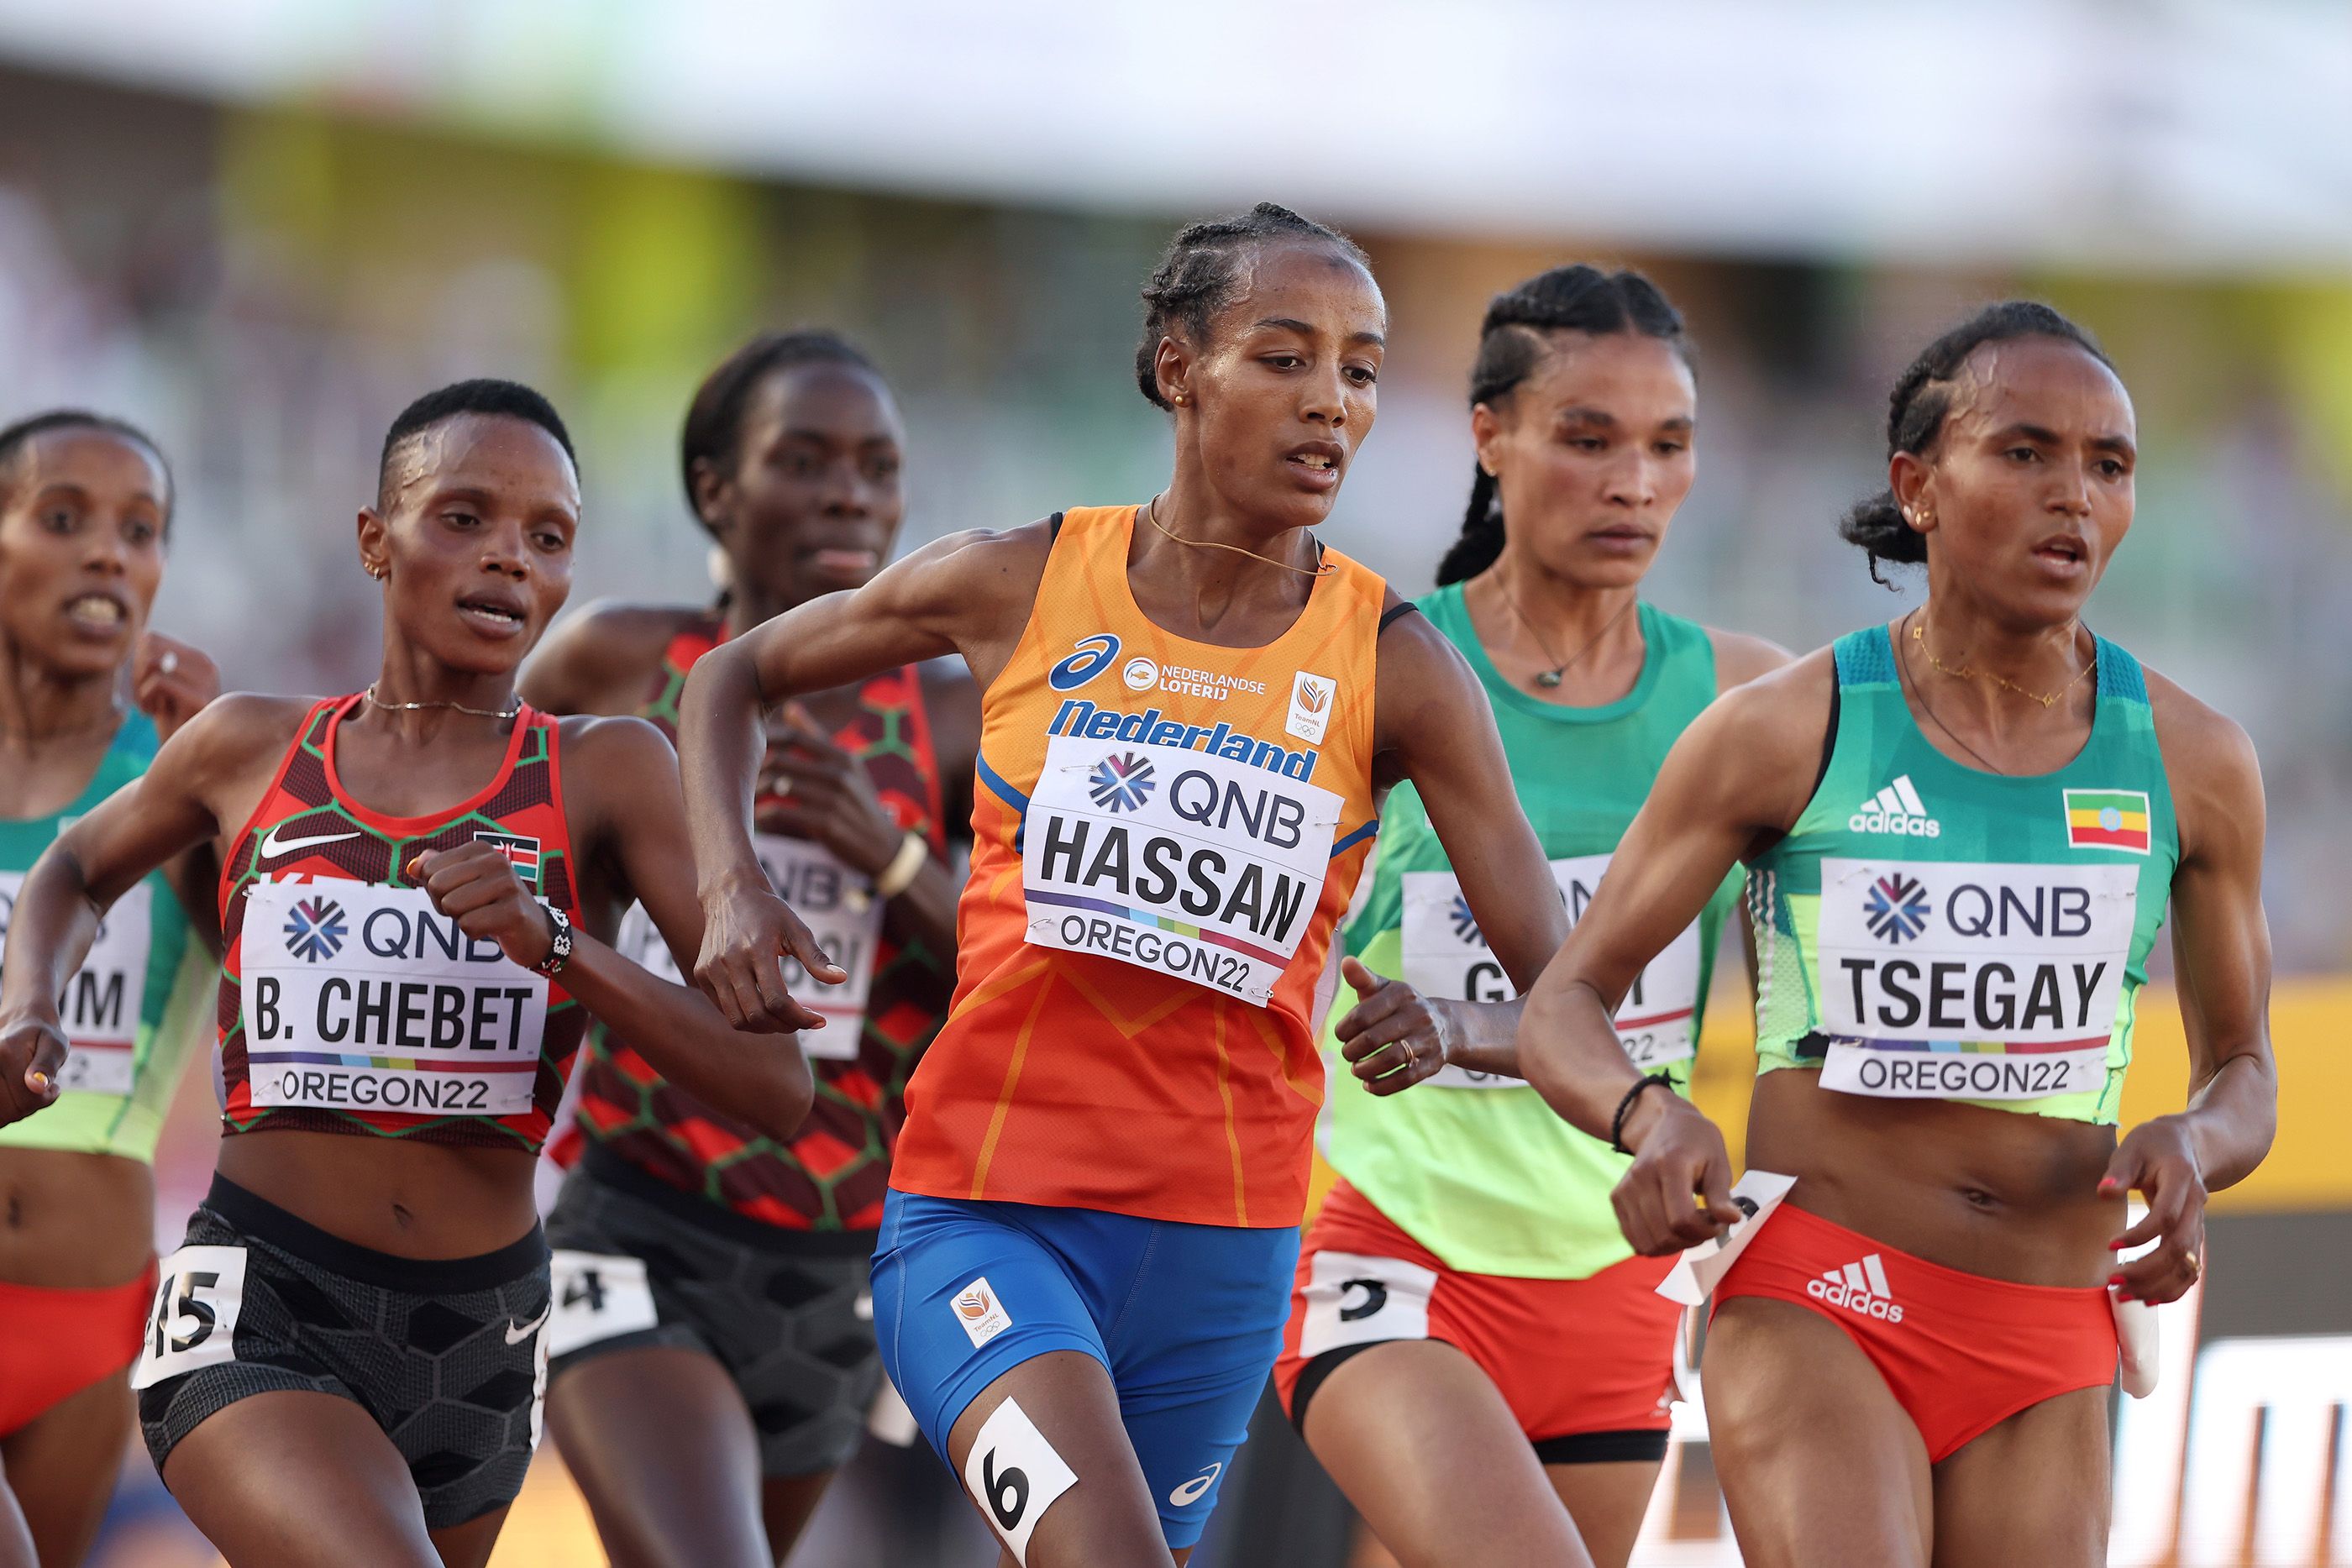 Beatrice Chebet races in the 5000m final at the World Athletics Championships Oregon22